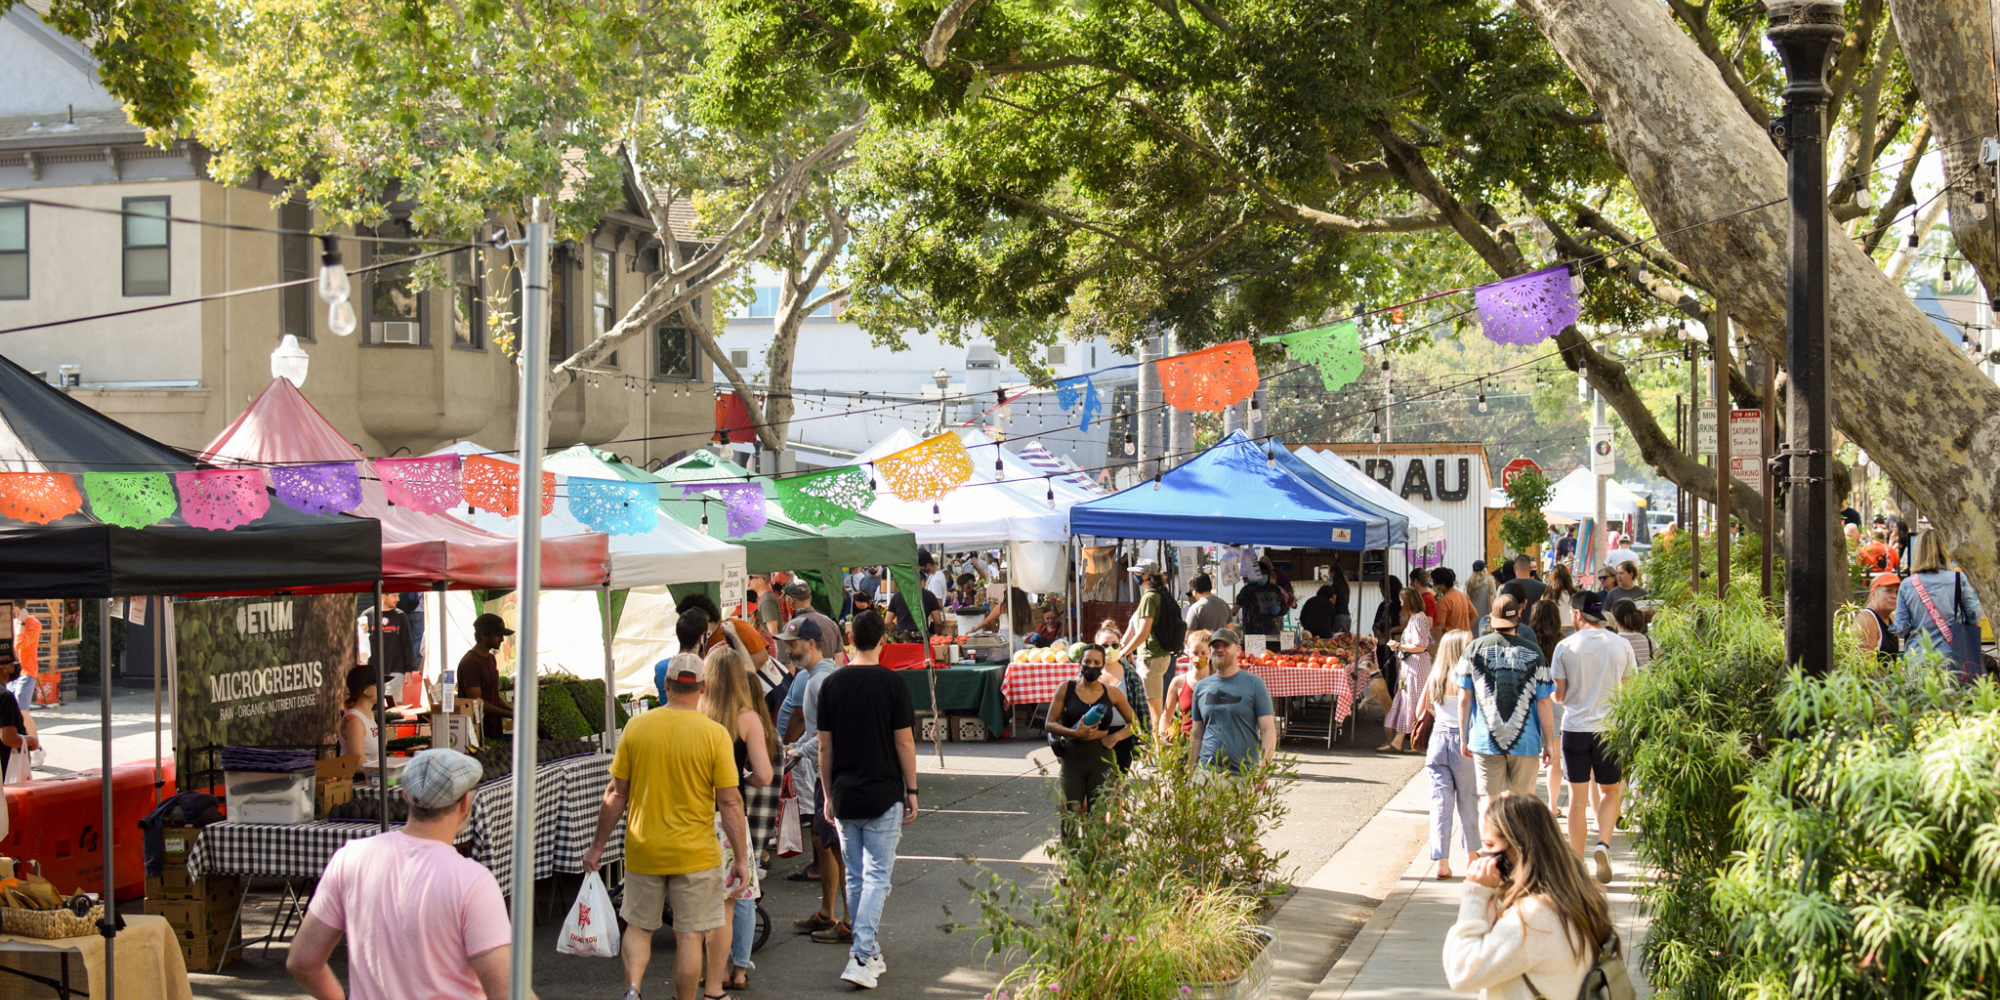 Make the Most of Your Visit to the Midtown Farmers Market